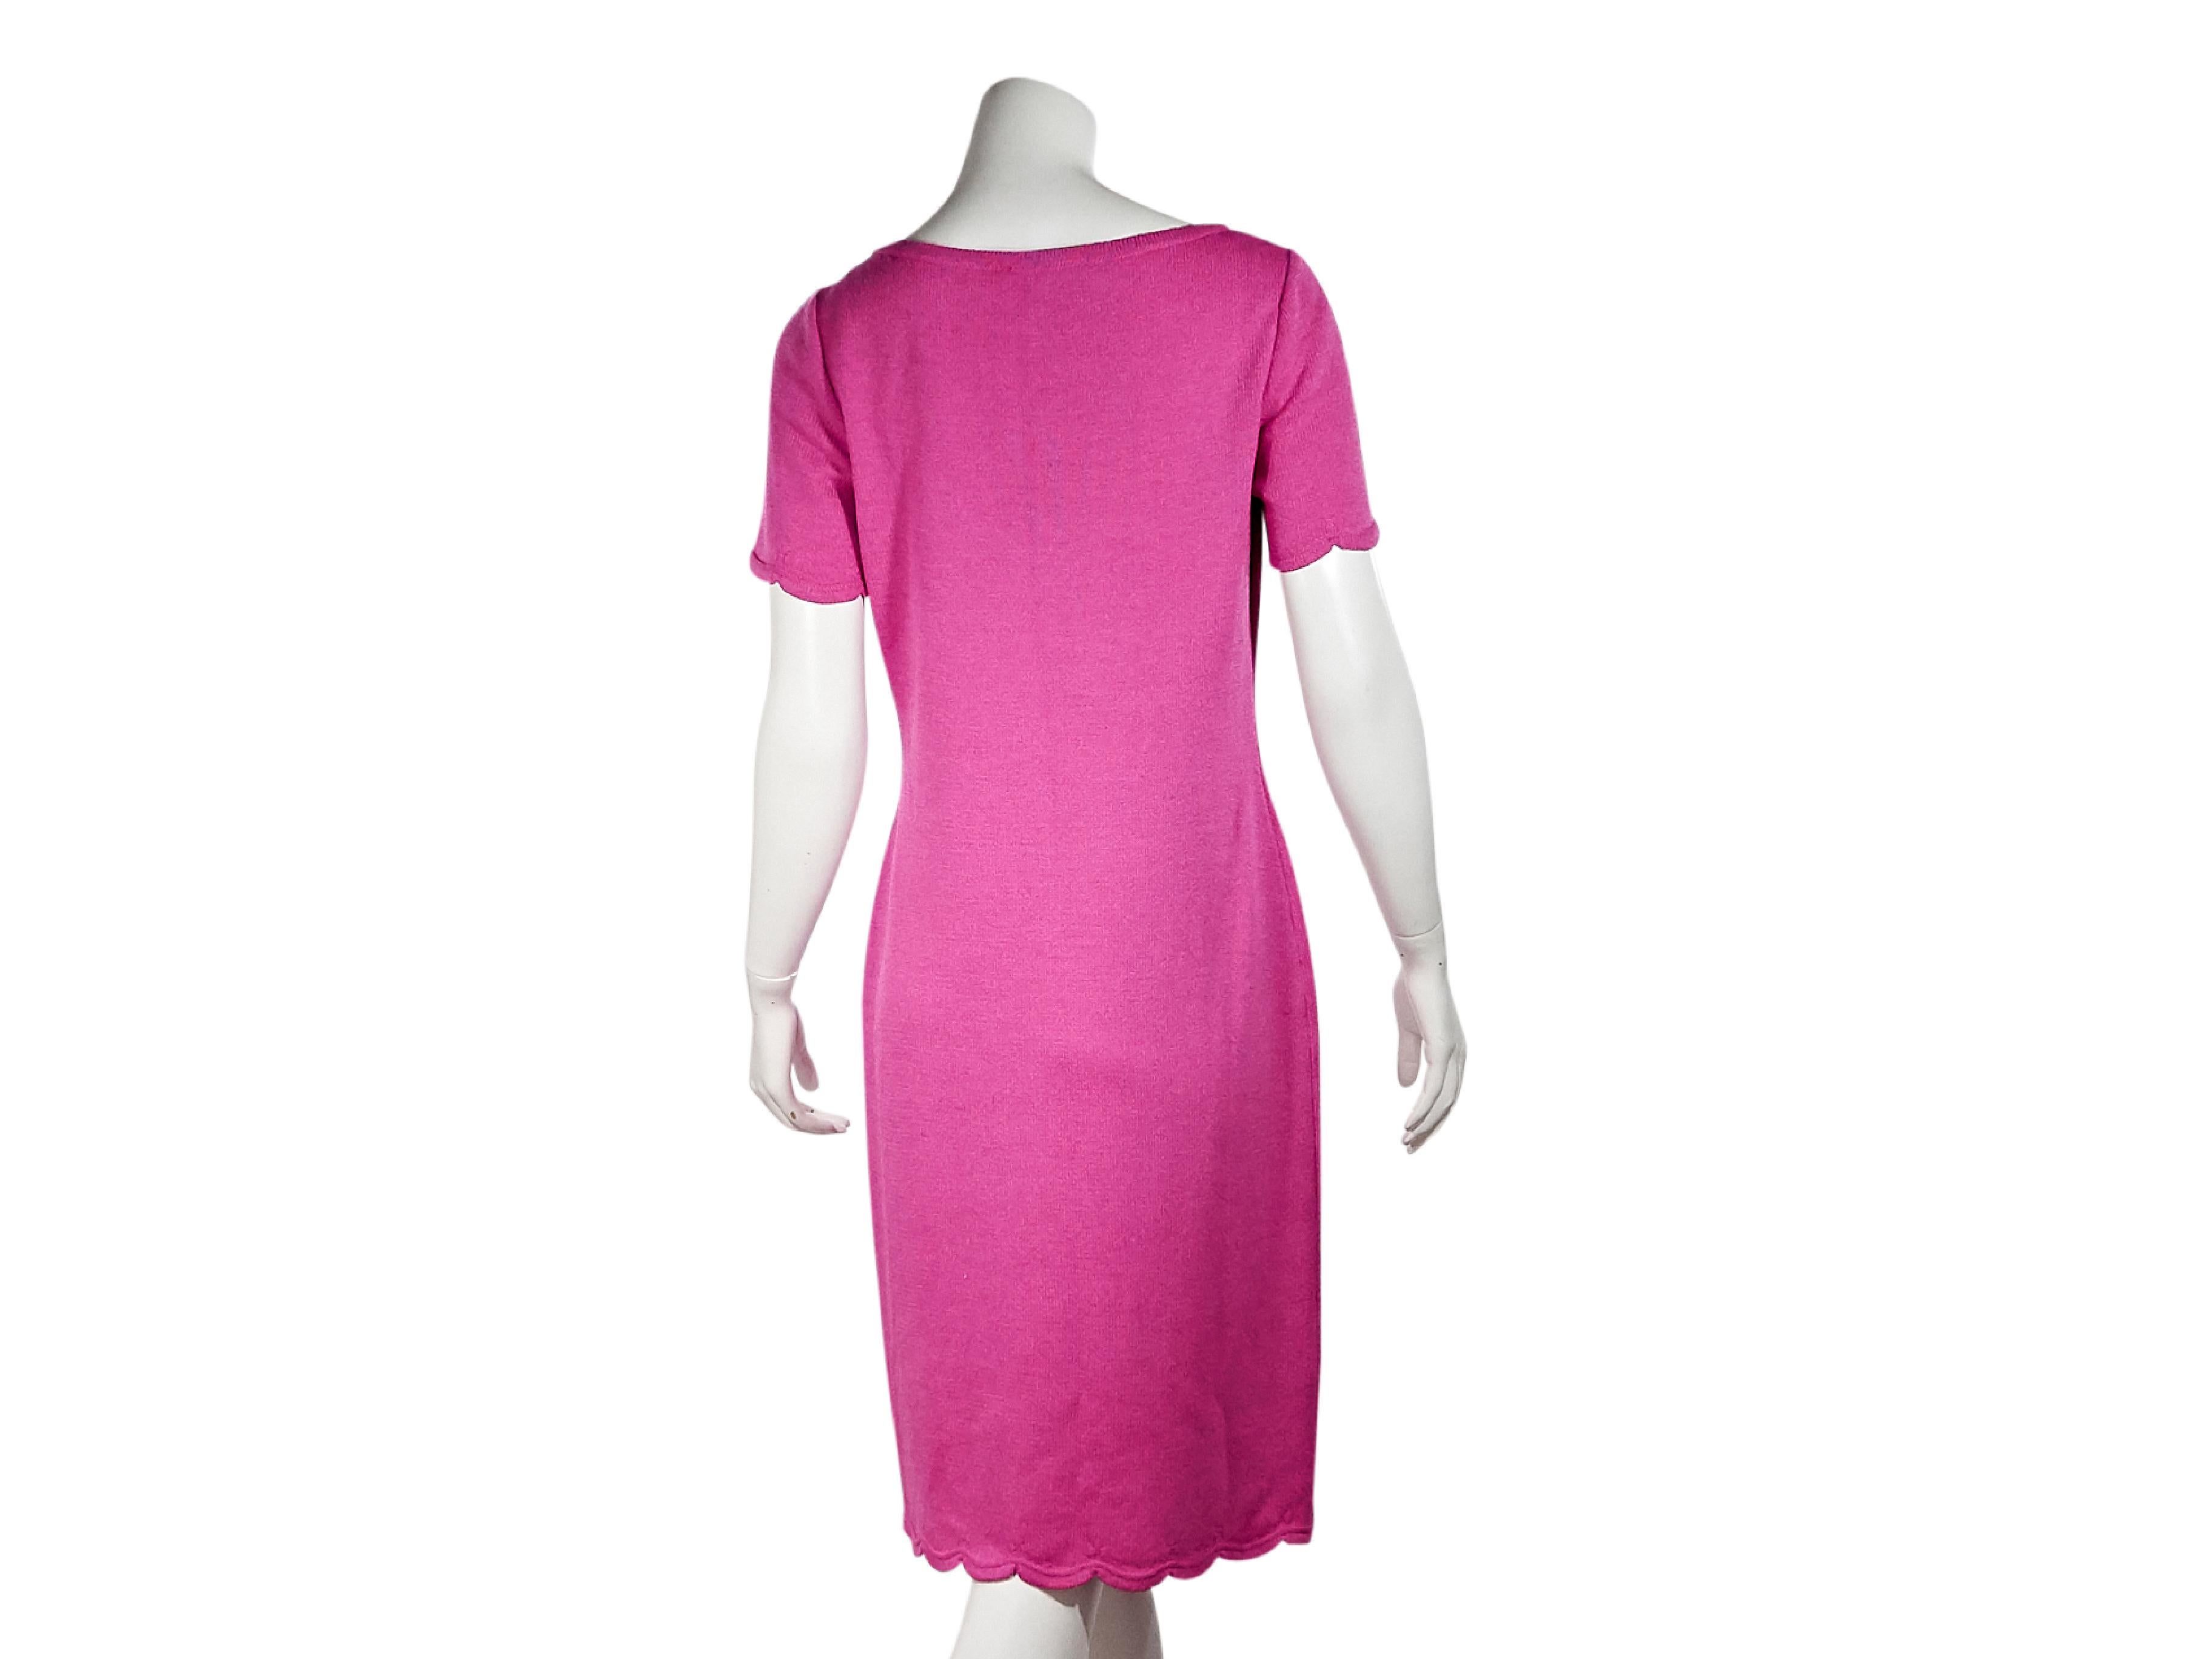 Product details:  Pink knit t-shirt dress by St. John.  Scoopneck.  Short sleeves.  Scalloped hem.  Pullover style.  34